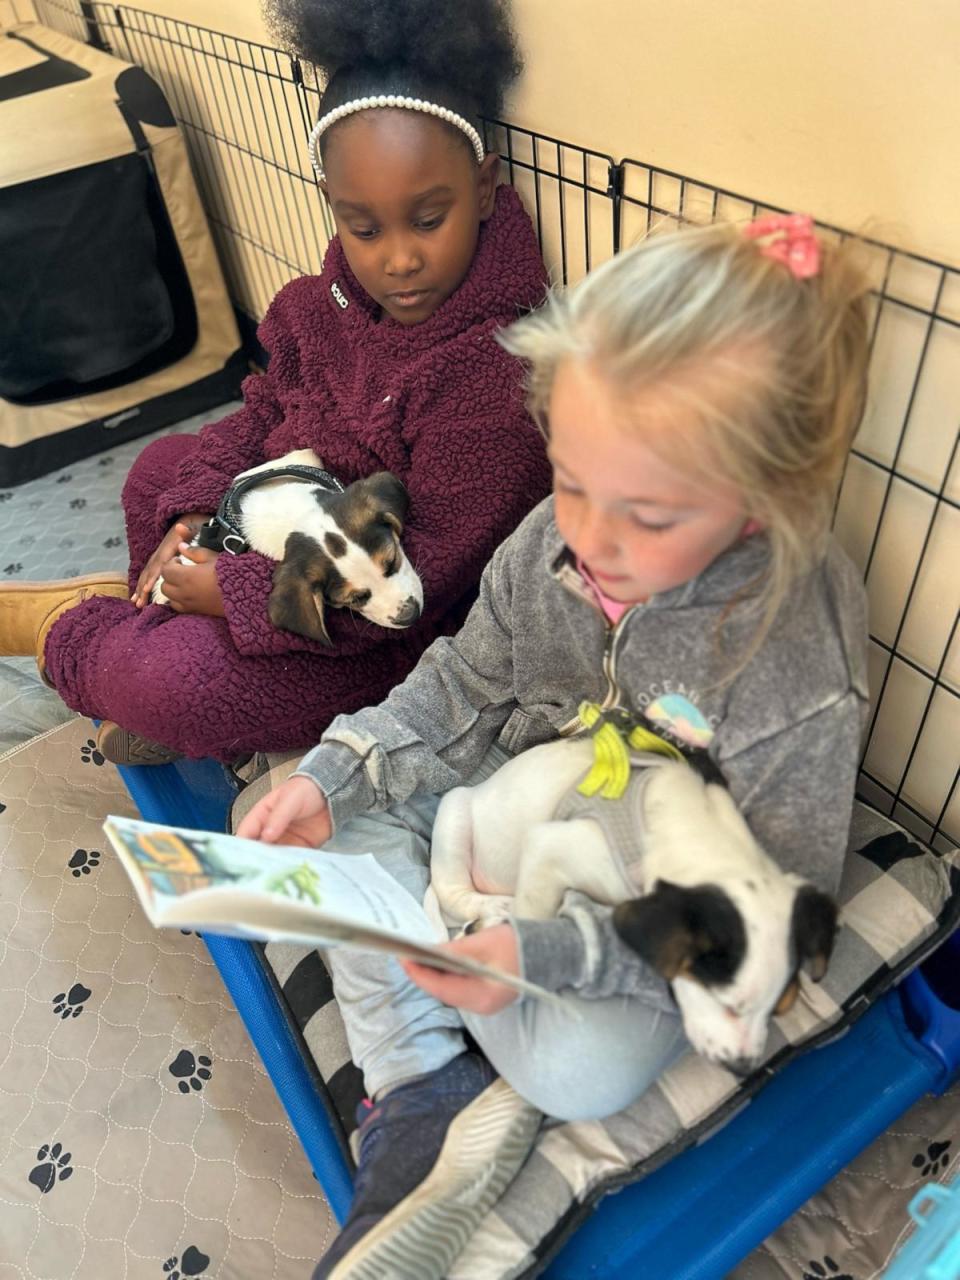 PHOTO: Hughes said through the puppy therapy program, students have not only worked on improving their reading skills but also their life skills, such as learning about responsibility. (Brooke Hughes/Foster Tales Puppy Therapy)